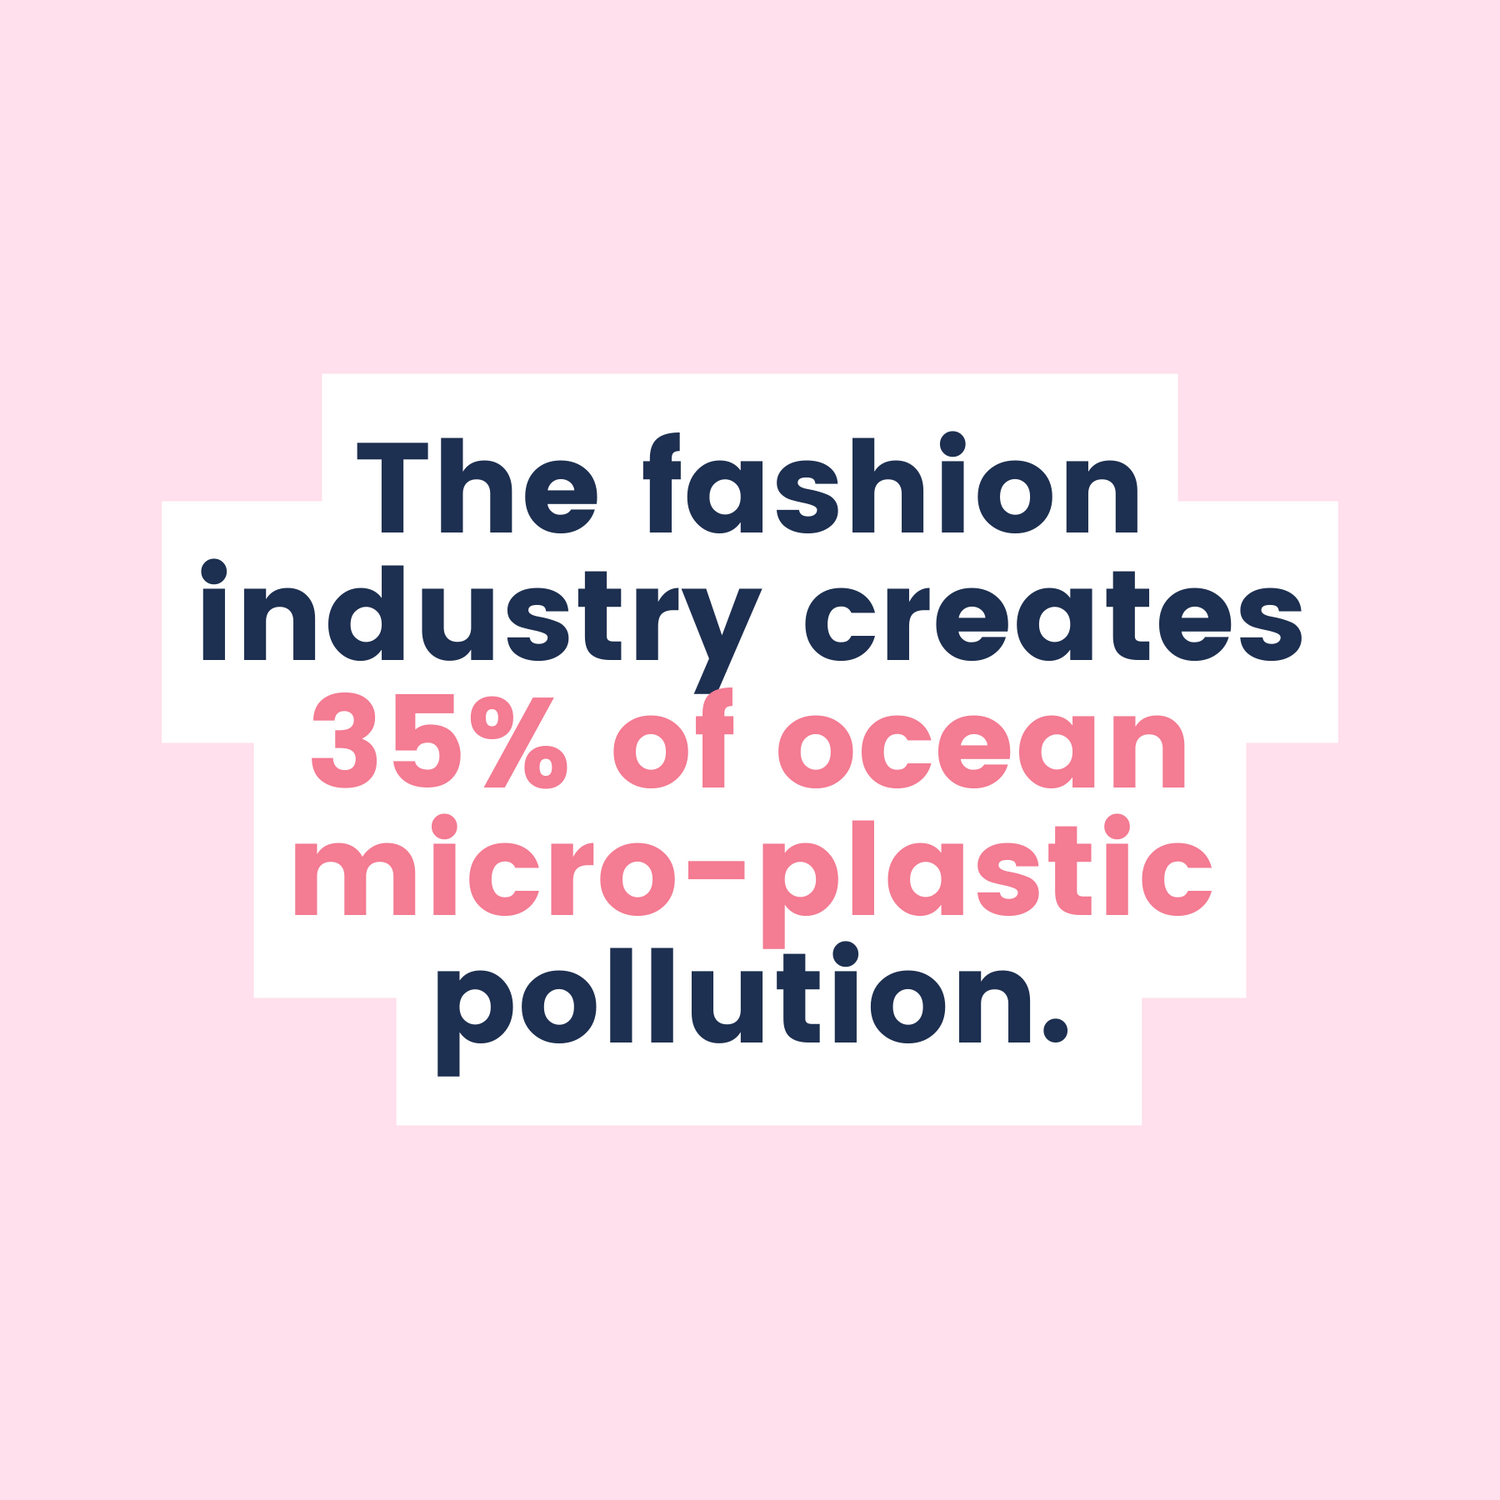 35% of ocean micro-plastic pollution is created by the fashion industry. Let's change it.